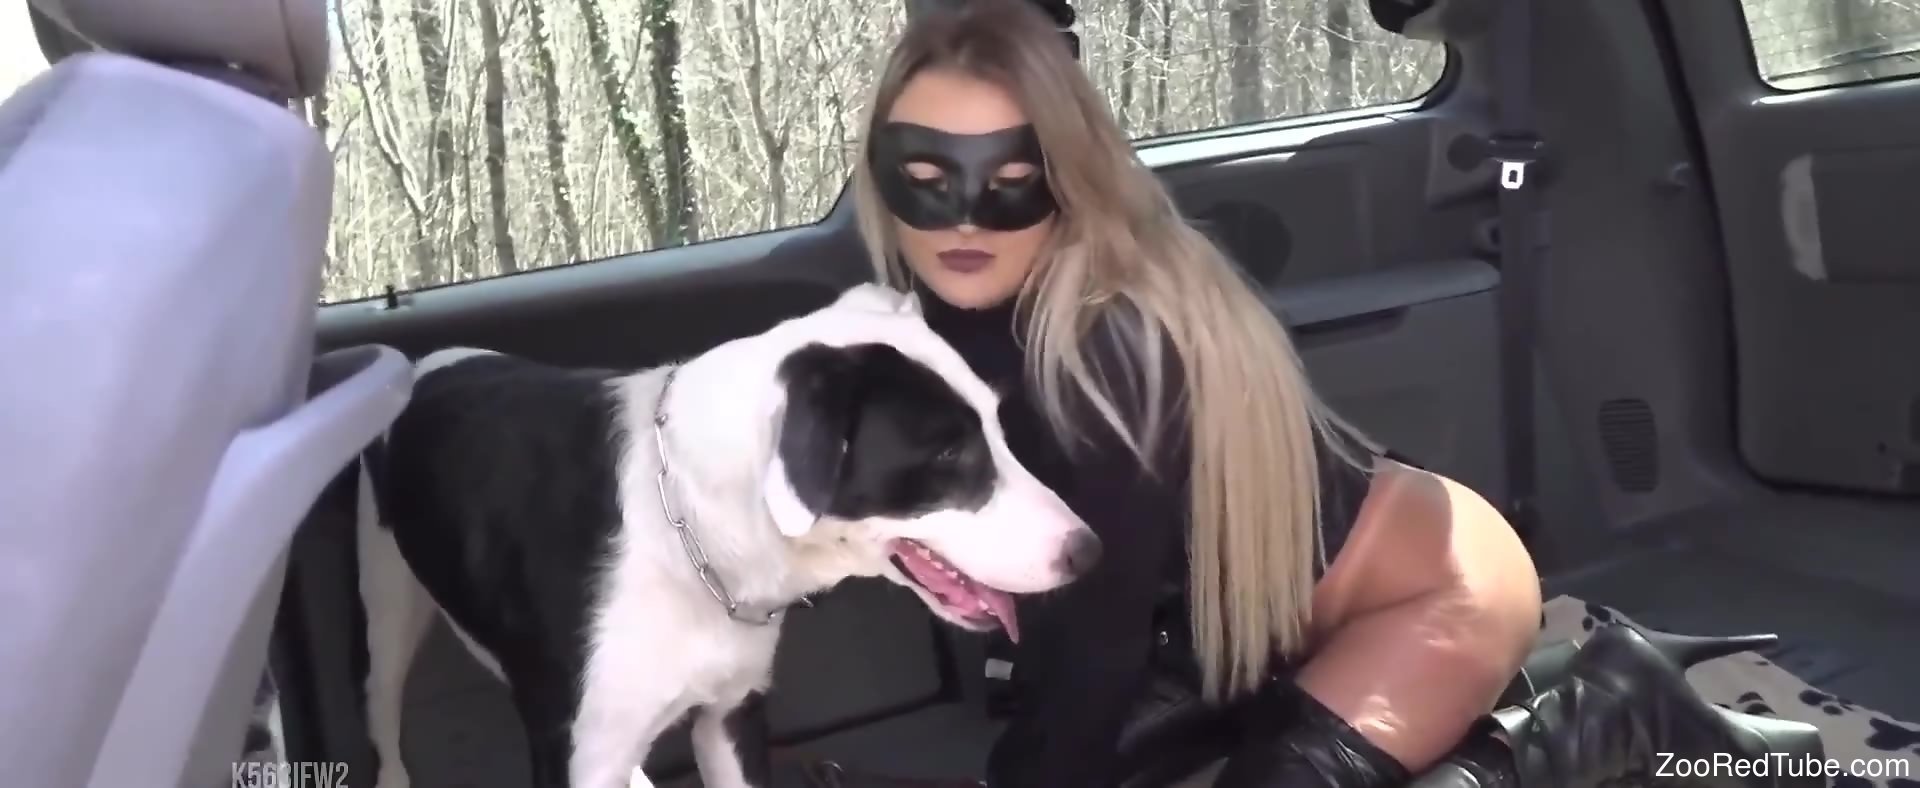 Dog Xxxsexy - Fine woman with sexy ass, doggy porn with a real dog in the car